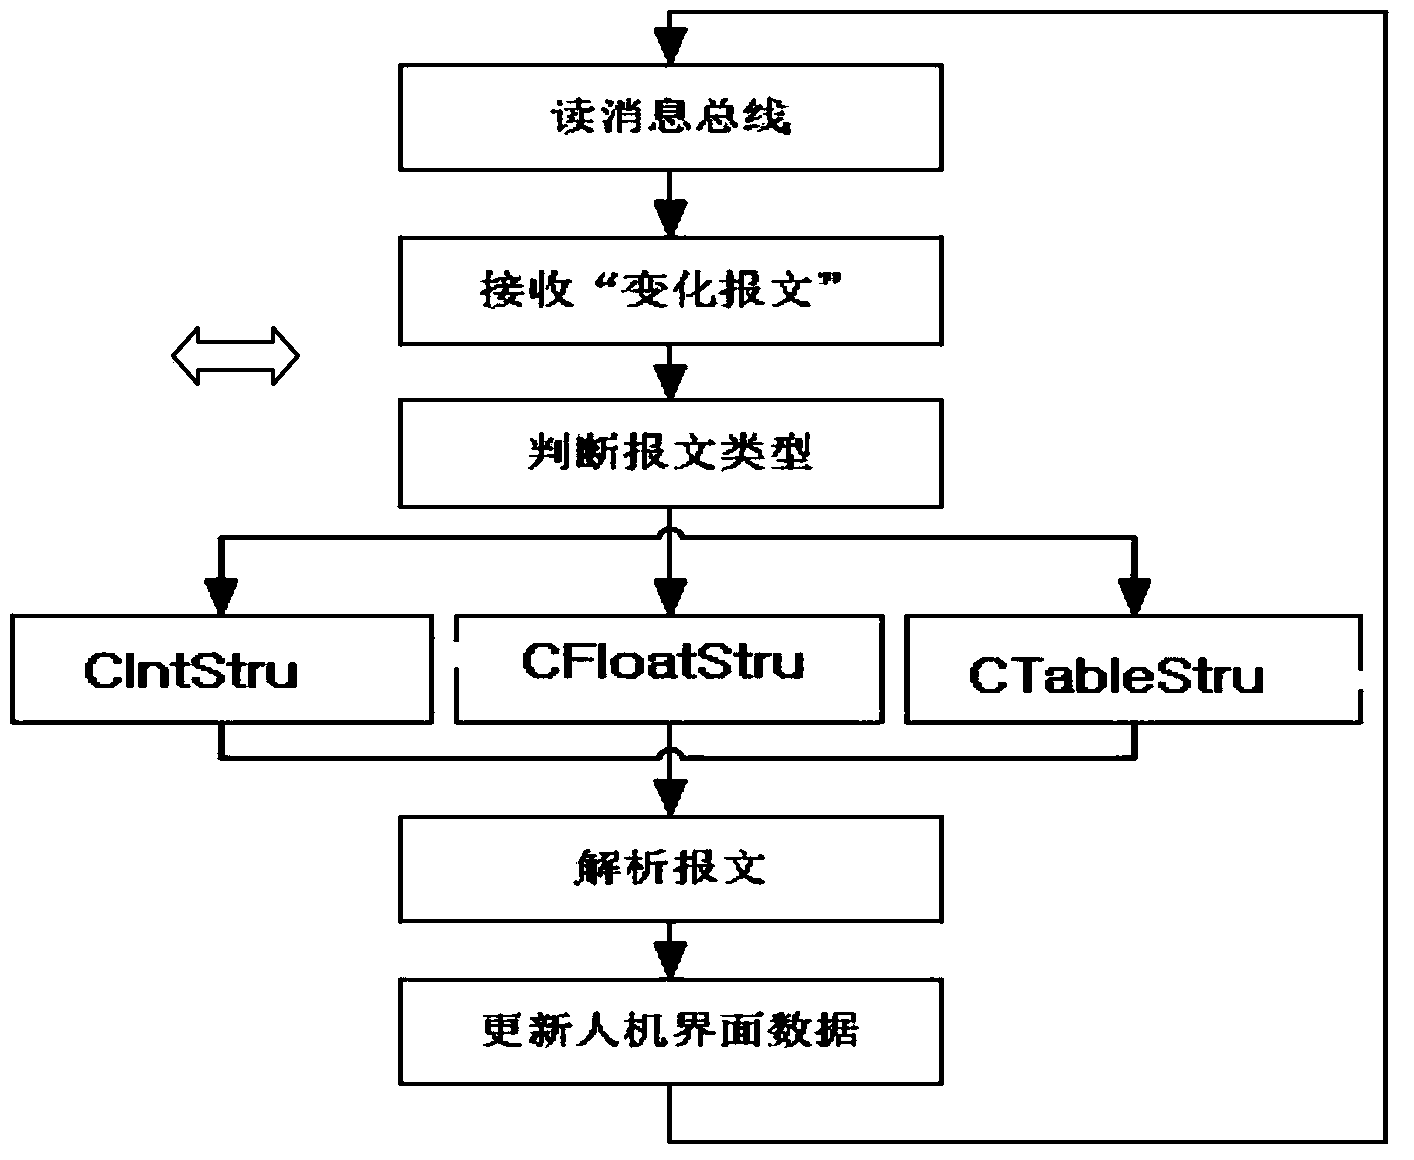 Data updating and synchronizing method for human-computer interface in automatic train supervision system